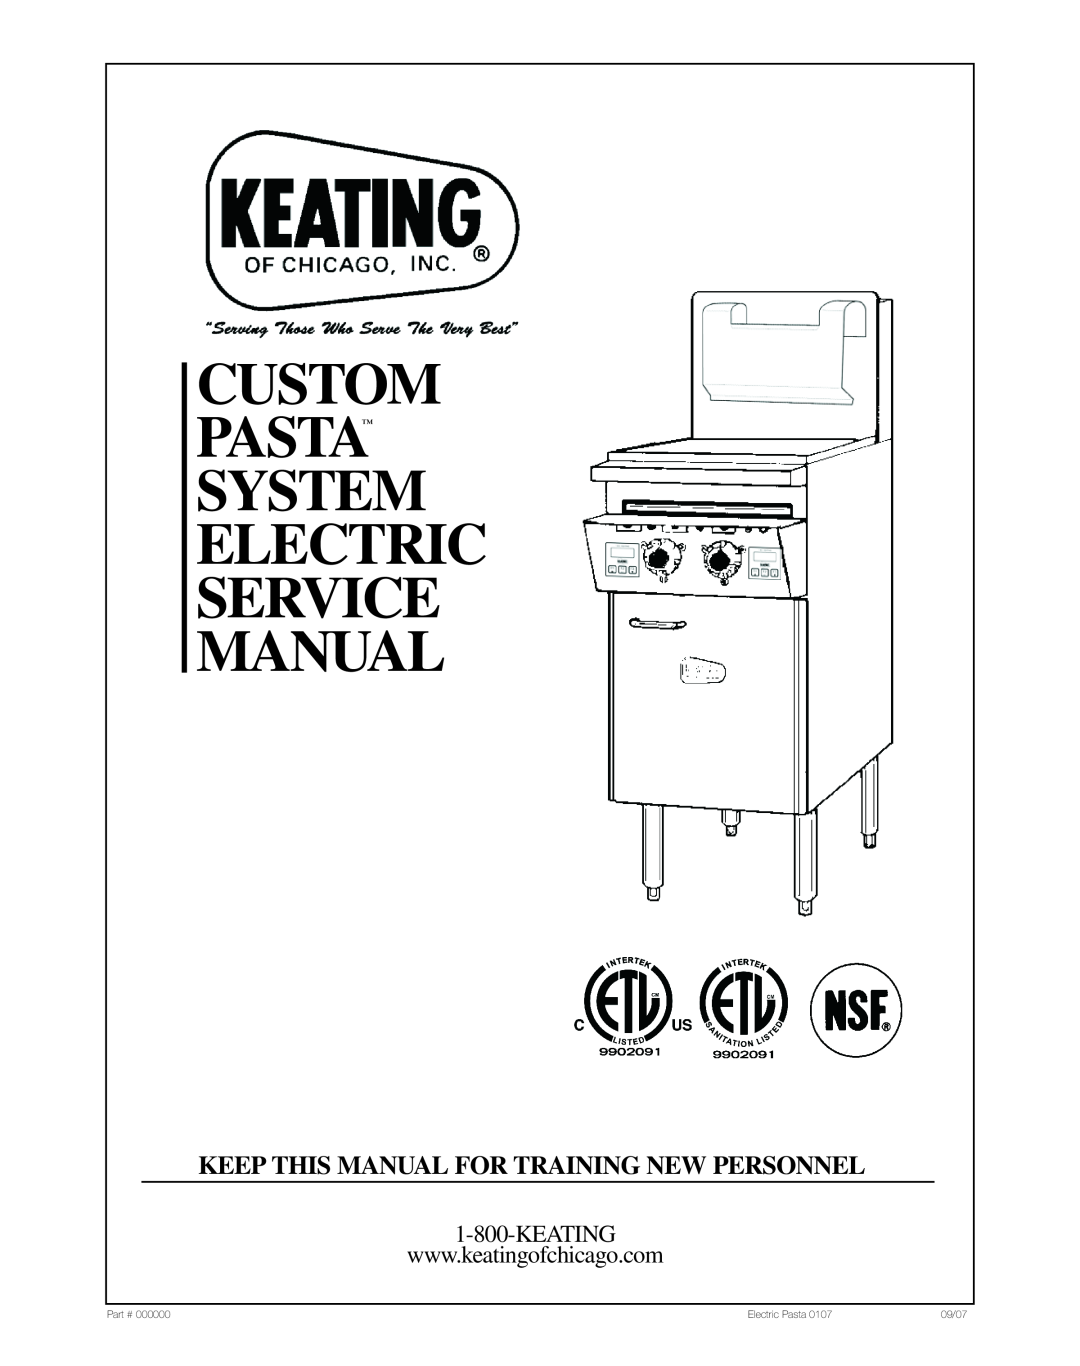 Keating Of Chicago 240V service manual Keep This Manual For Training New Personnel, Keating, 000000, Electric Pasta, 09/07 